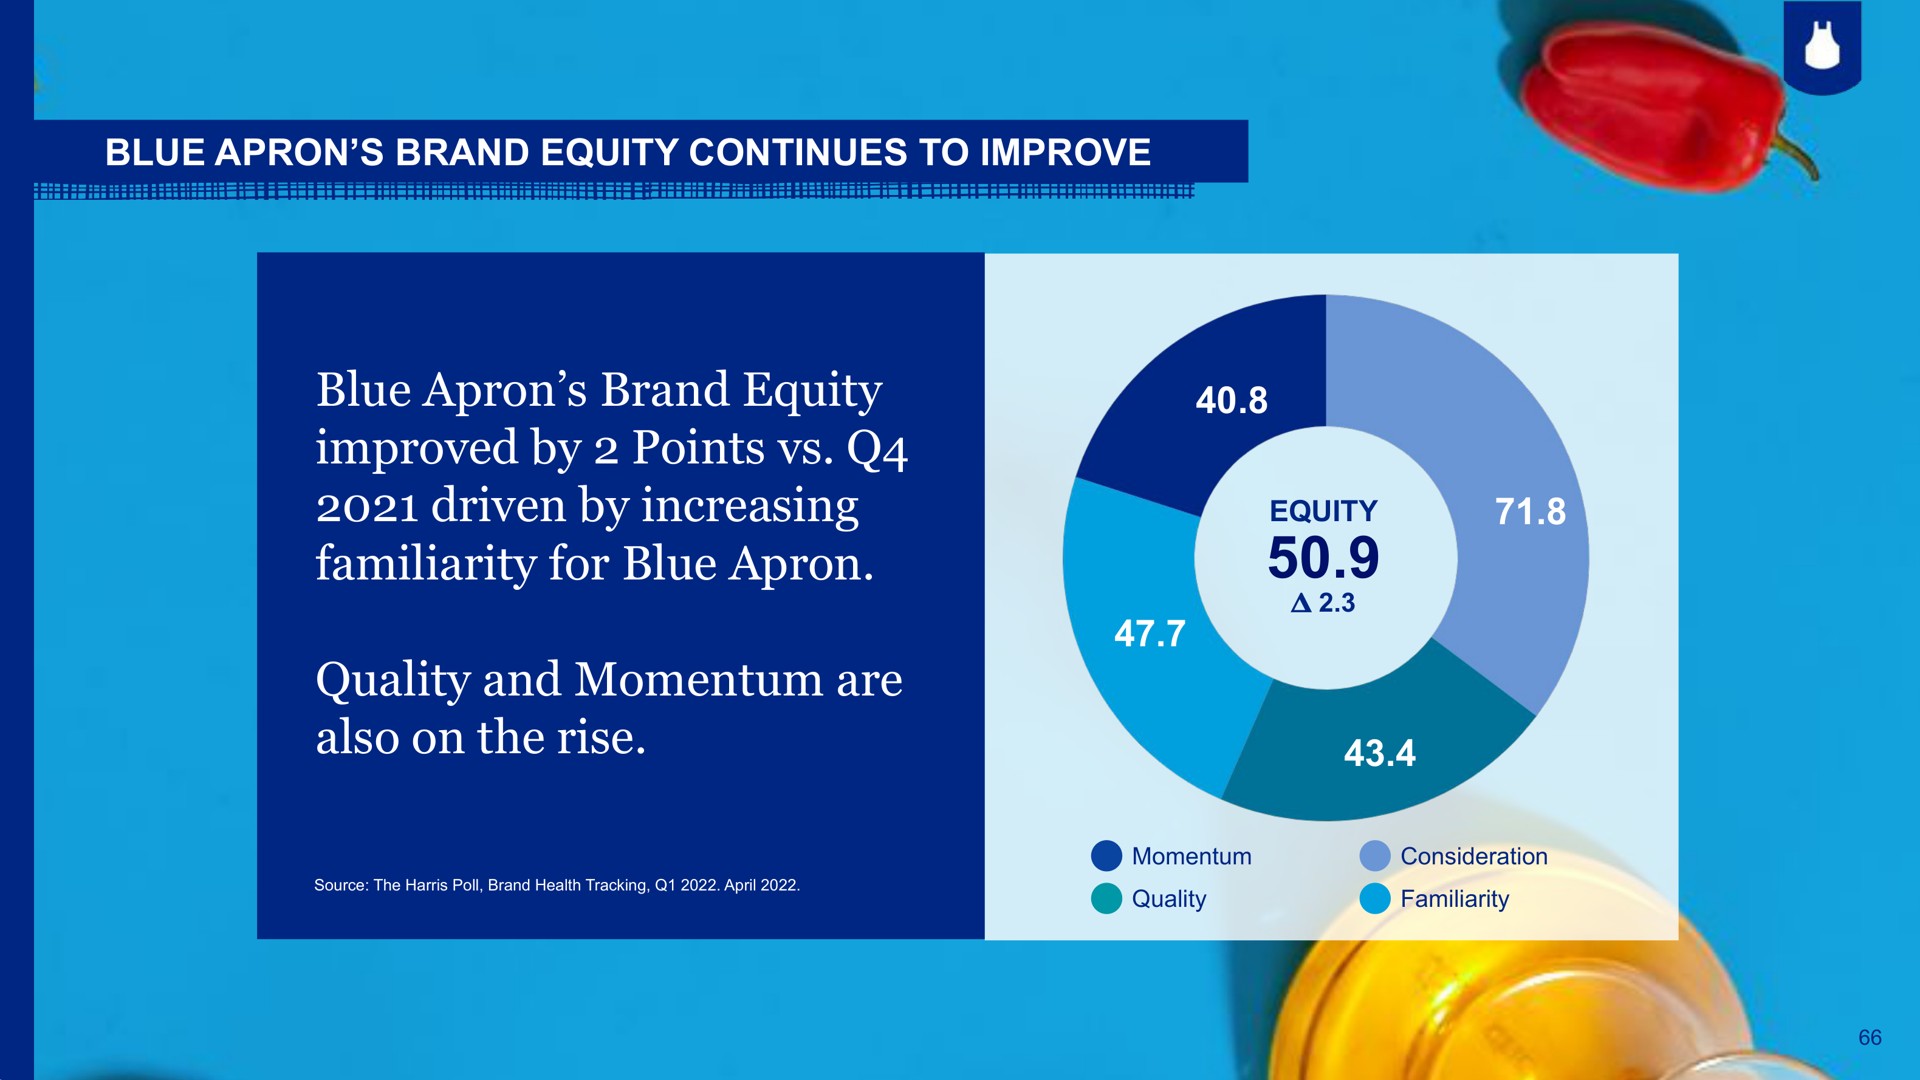 blue apron brand equity continues to improve blue apron brand equity improved by points driven by increasing familiarity for blue apron quality and momentum are also on the rise son a | Blue Apron